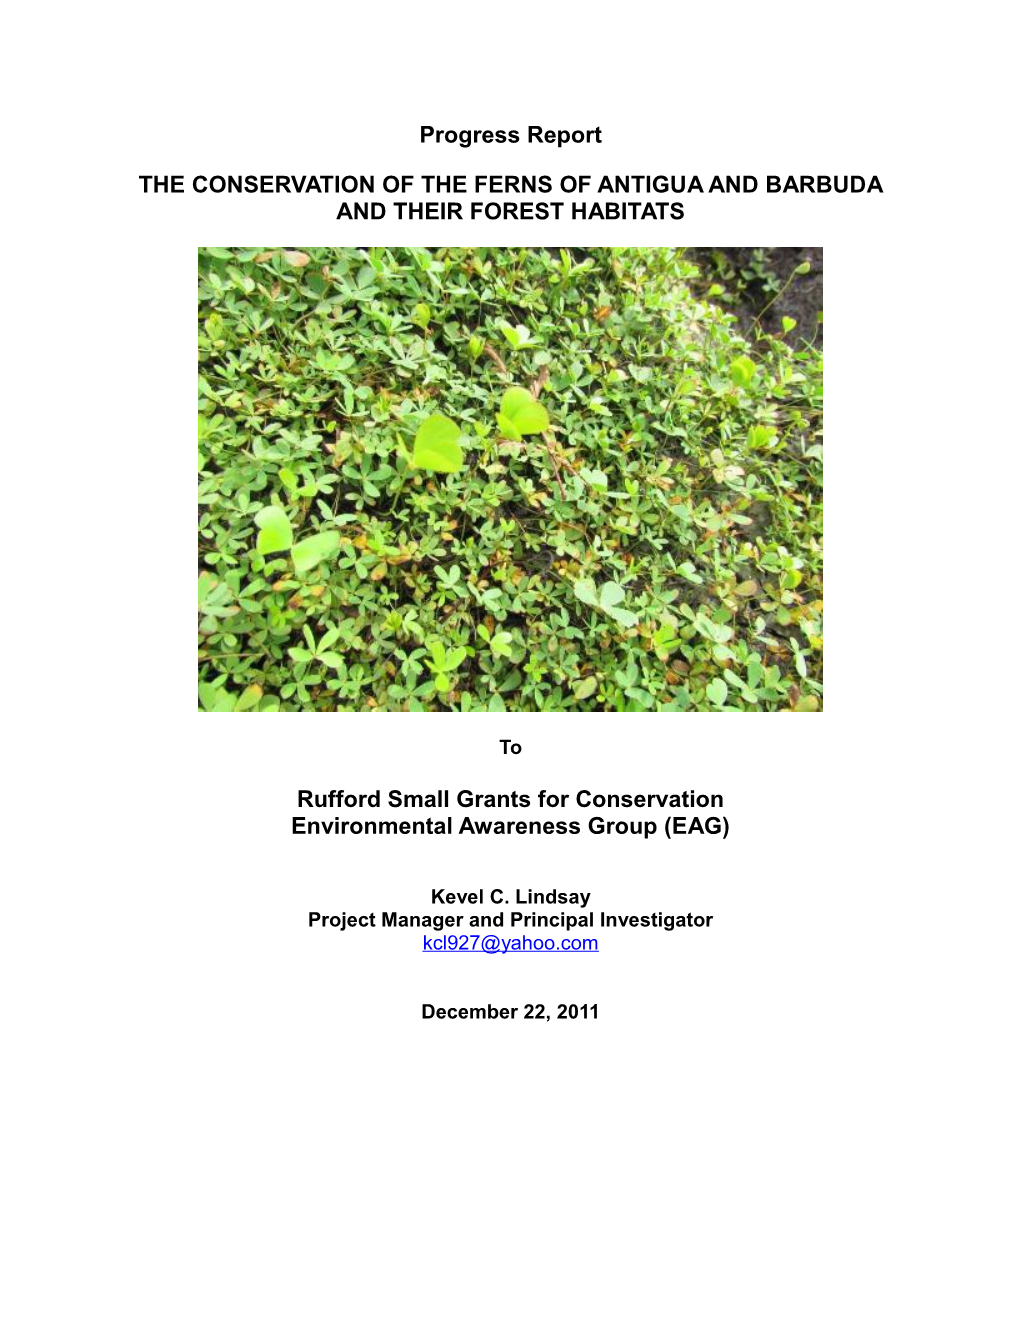 The Conservation of the Ferns of Antigua and Barbuda and Their Forest Habitats